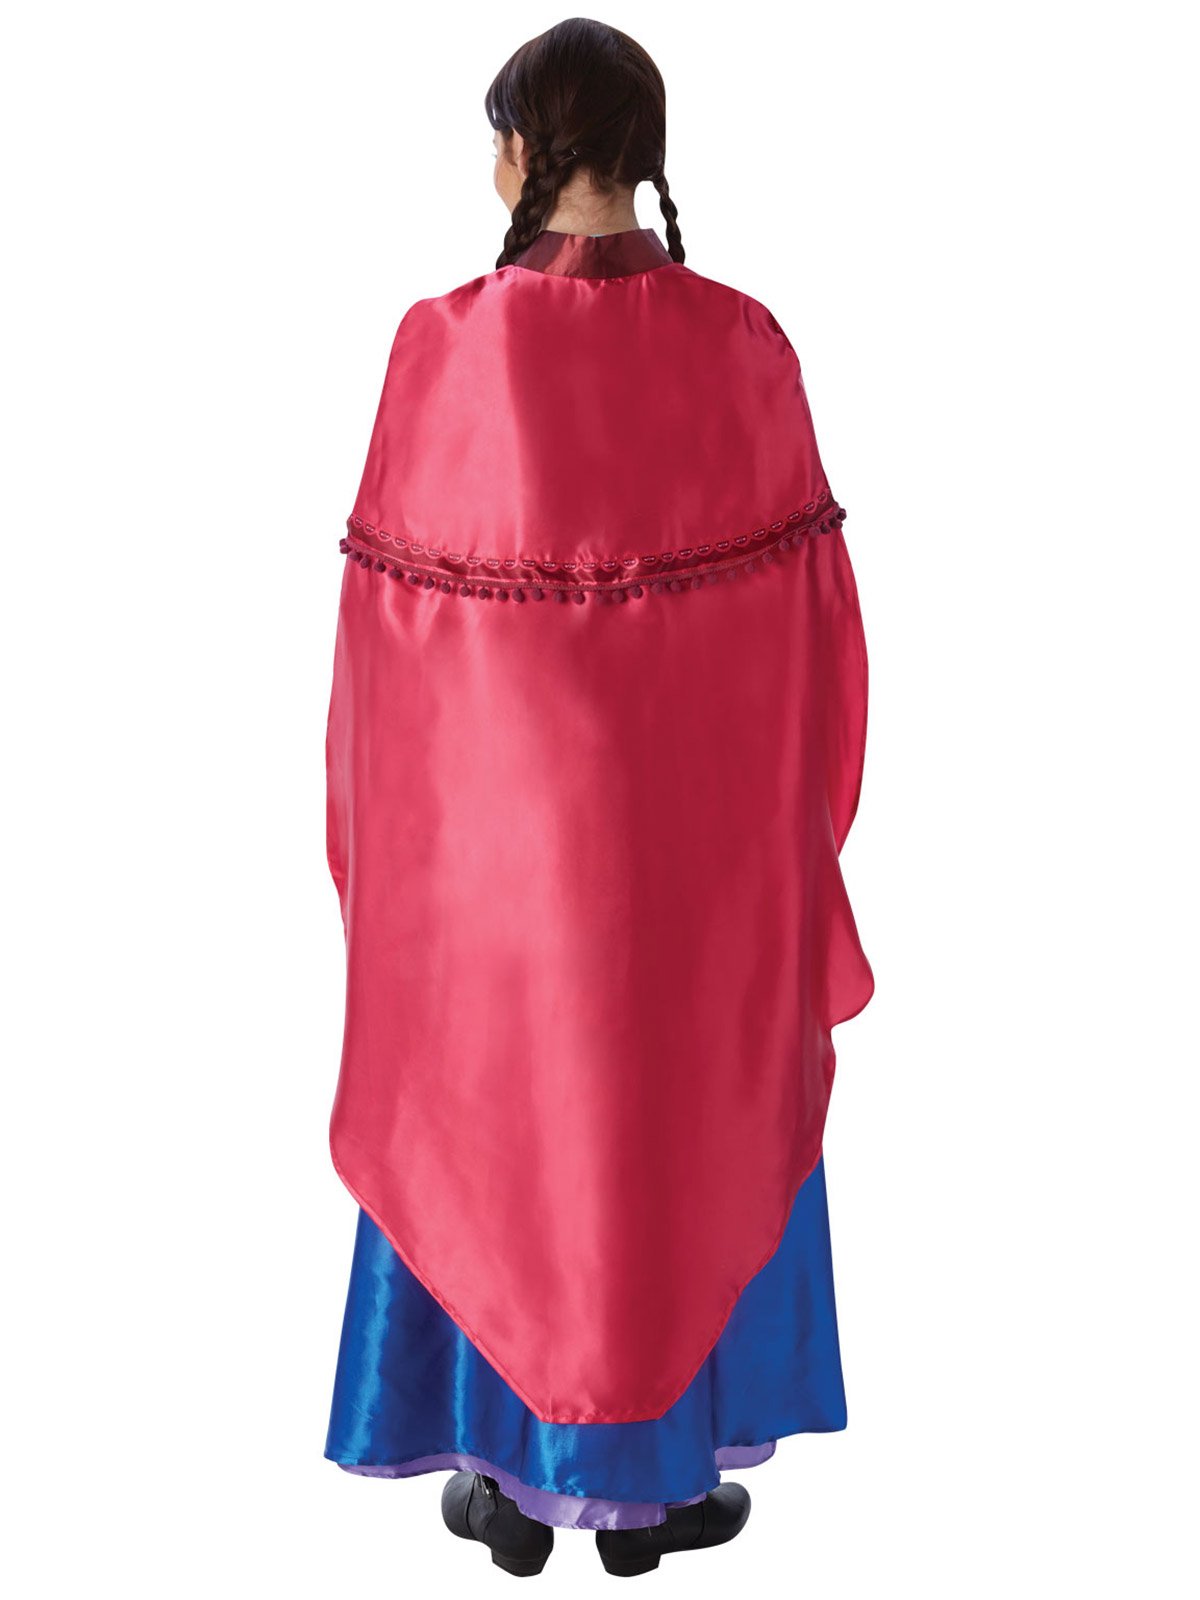 Costume Adult Frozen 2 Anna Large